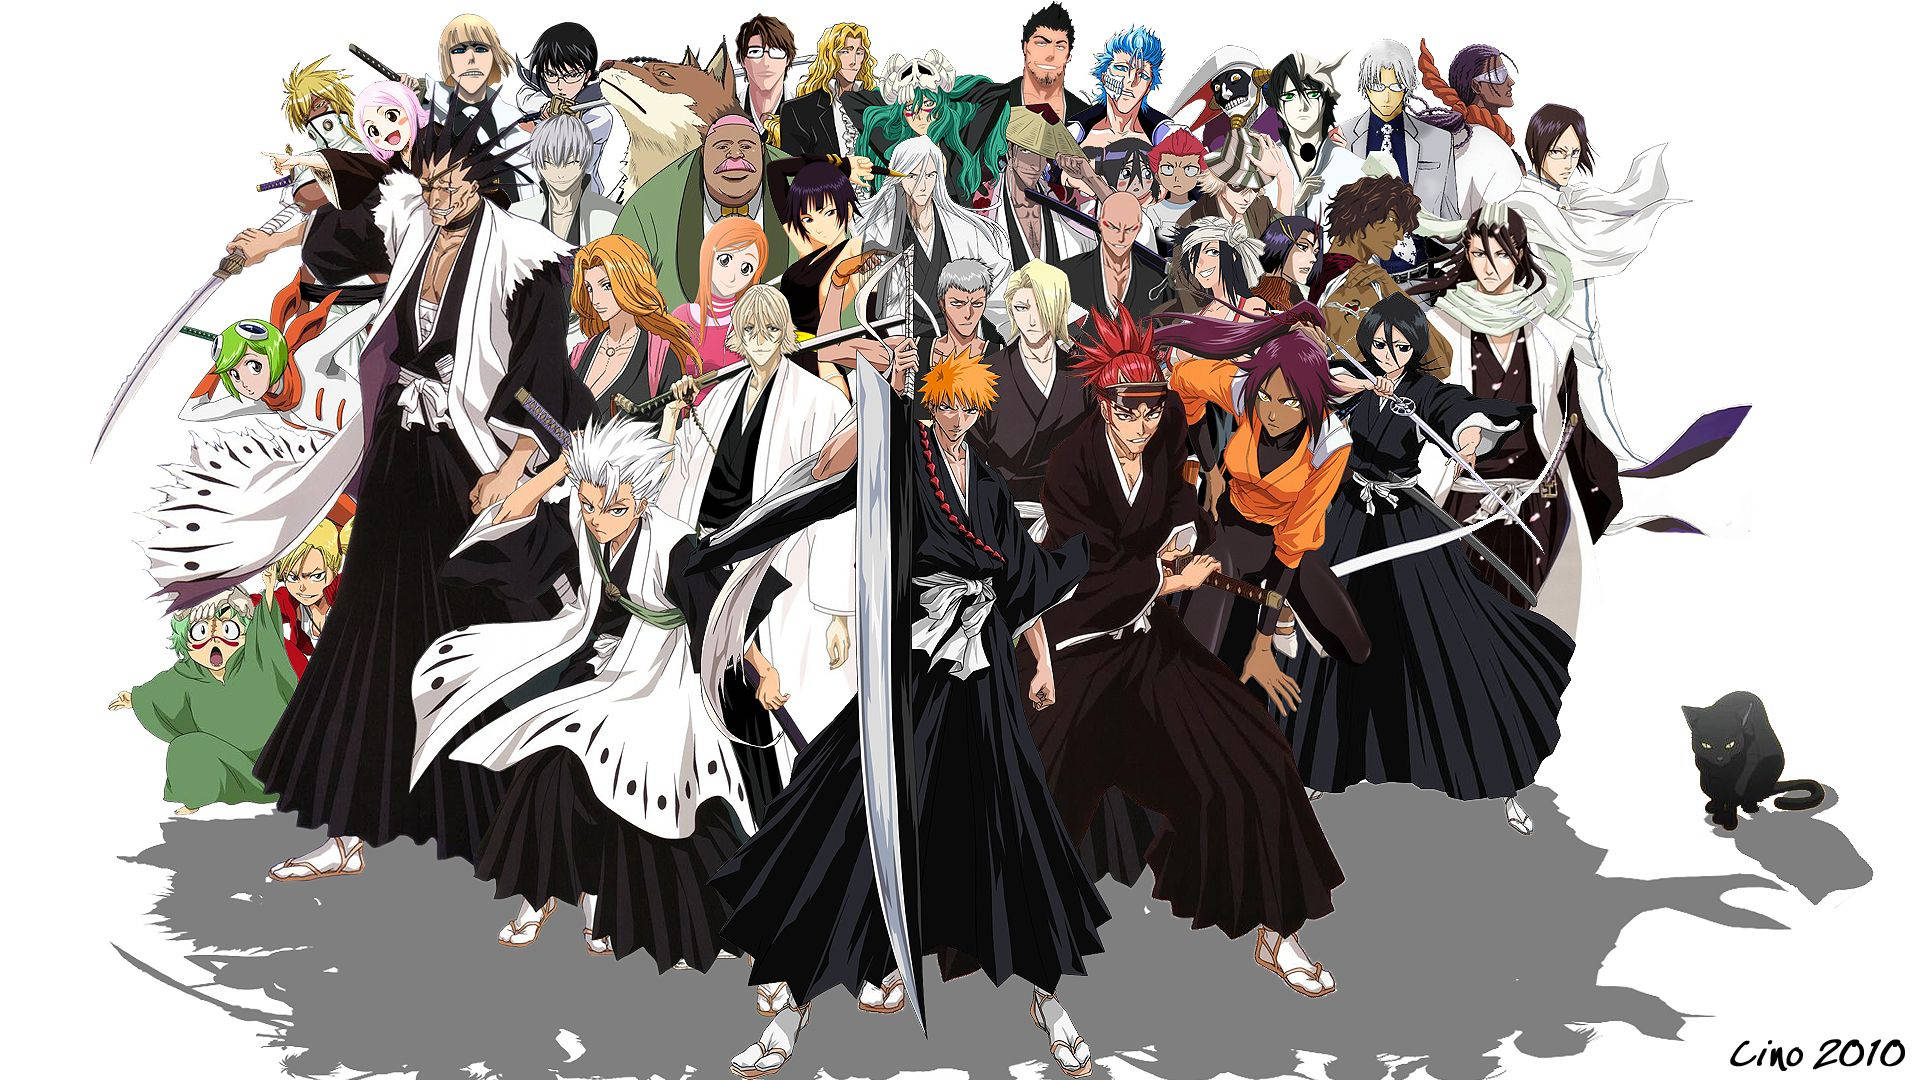 Ichigo and the gang ready for action! Wallpaper